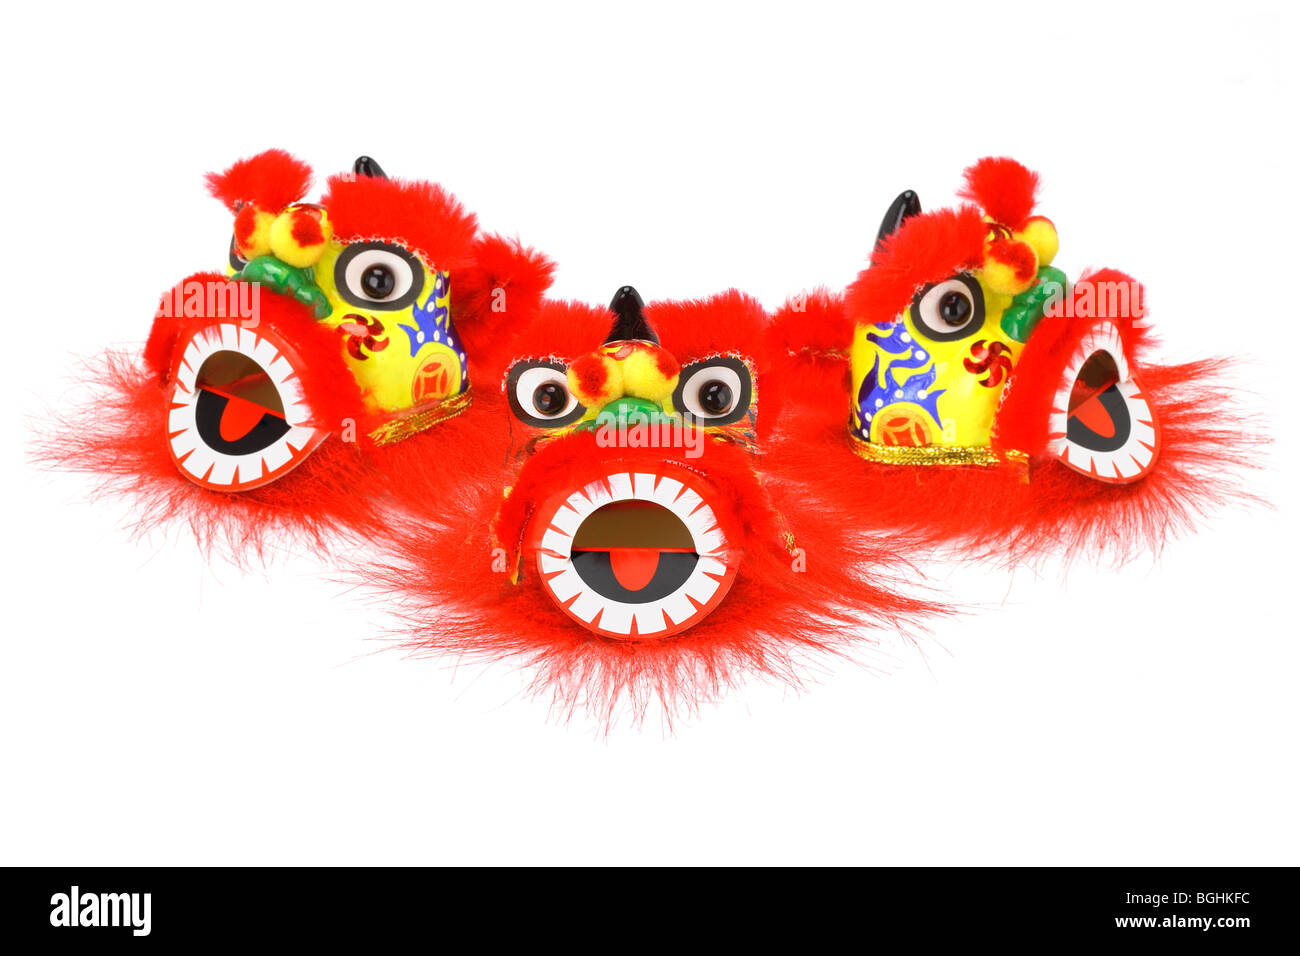 Three Chinese new year lion head ornaments arranged on white Stock Photo